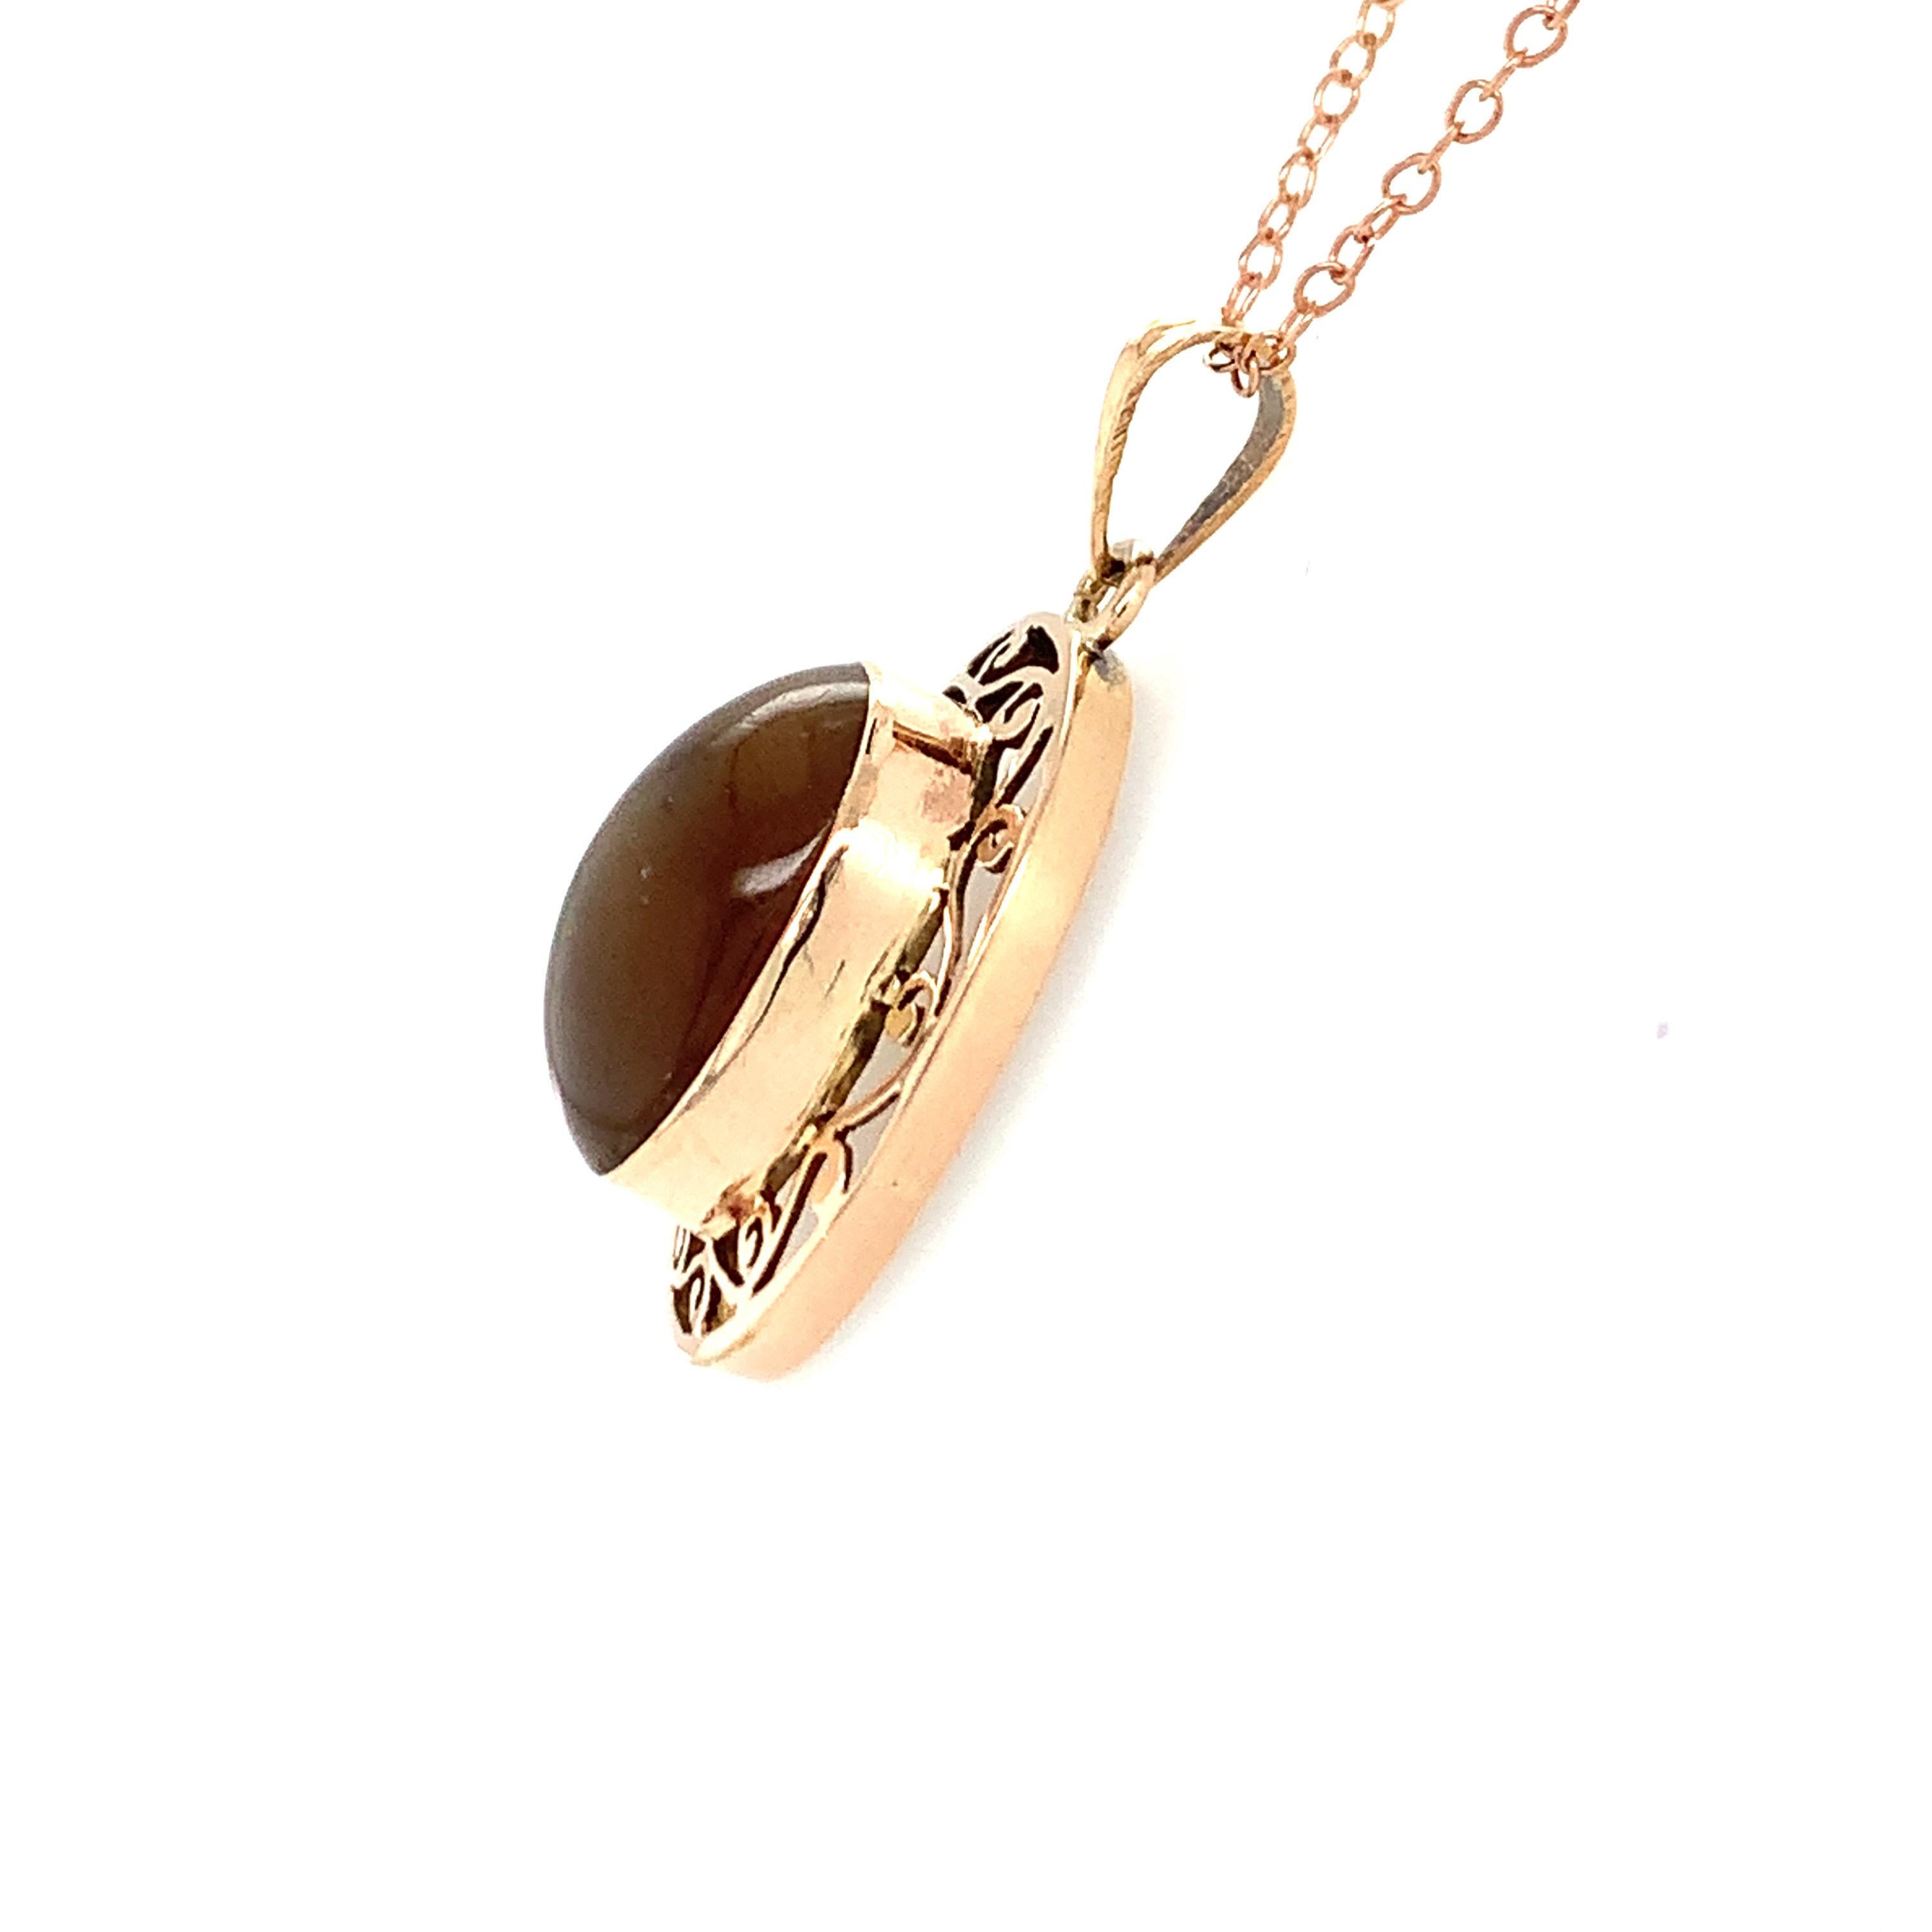 Hand cut and polished honey colored natural cat's eye is crafted with hand in 14K yellow gold. 
Ideal for daily casual wear.
Chain is not included. 
Image is enlarged to get a closer view.
Ethically sourced natural gem stone.